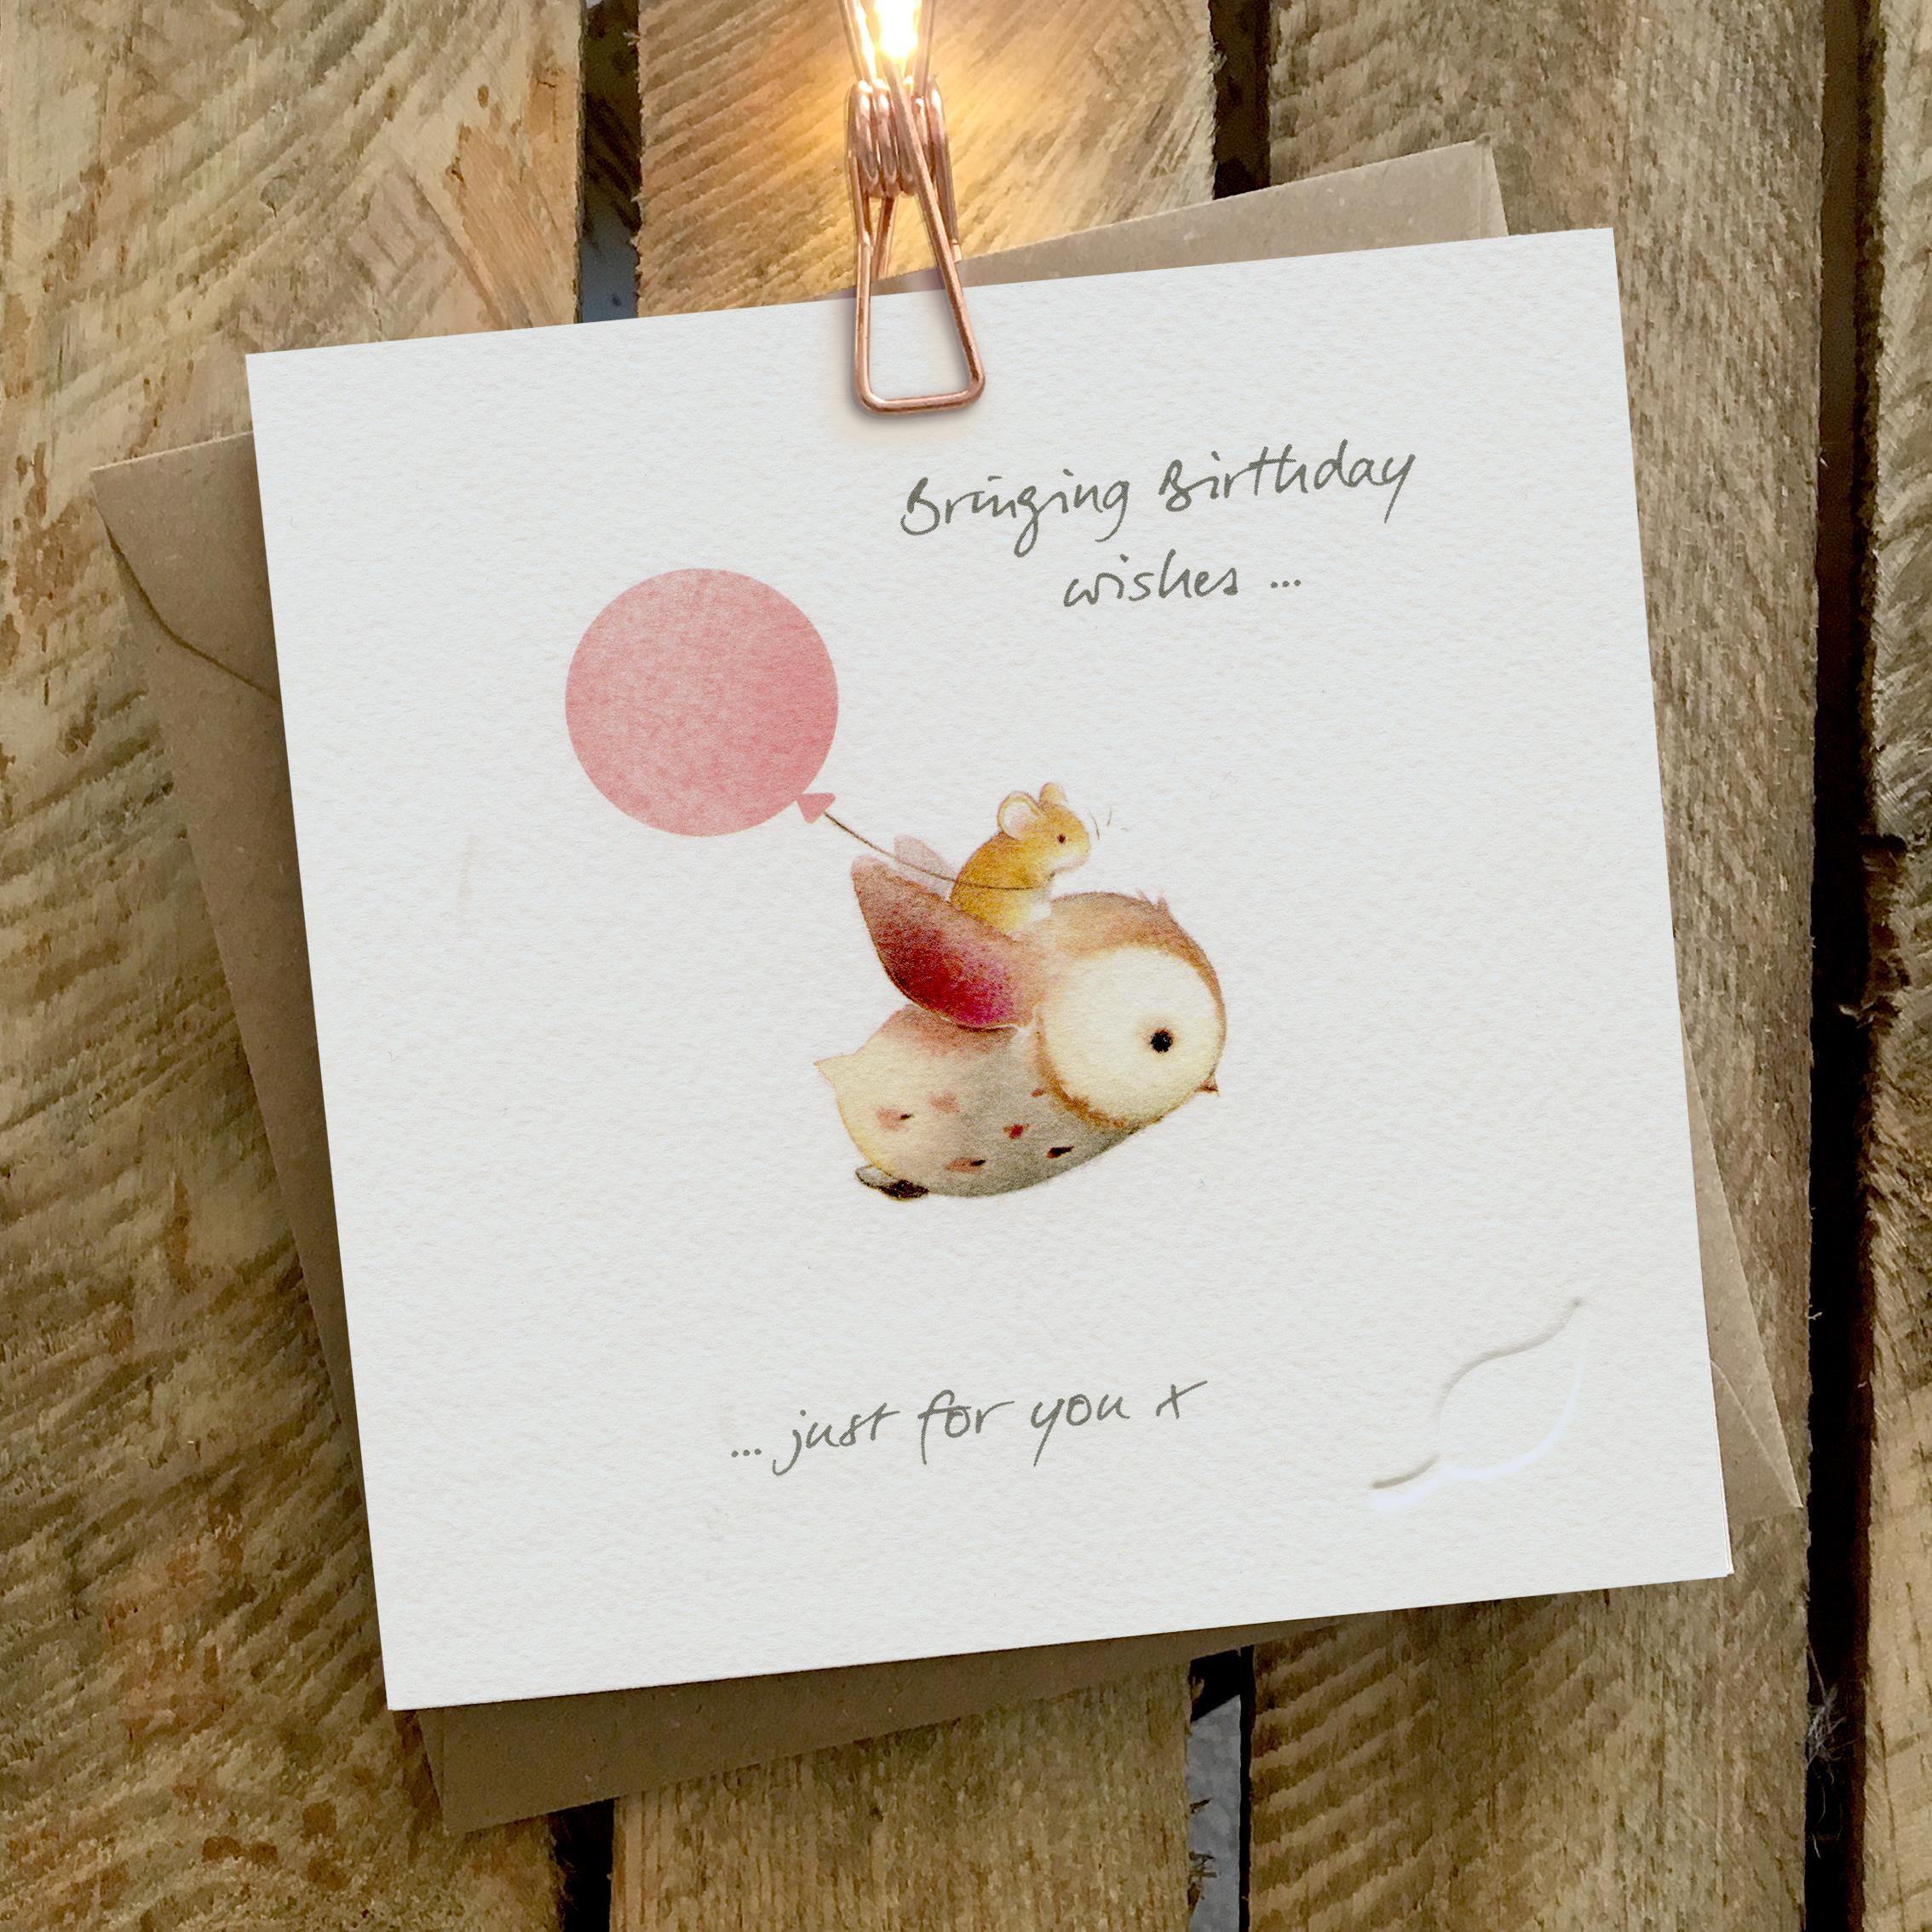 Card featuring a mouse carrying a red balloon, and riding on a flying Owl